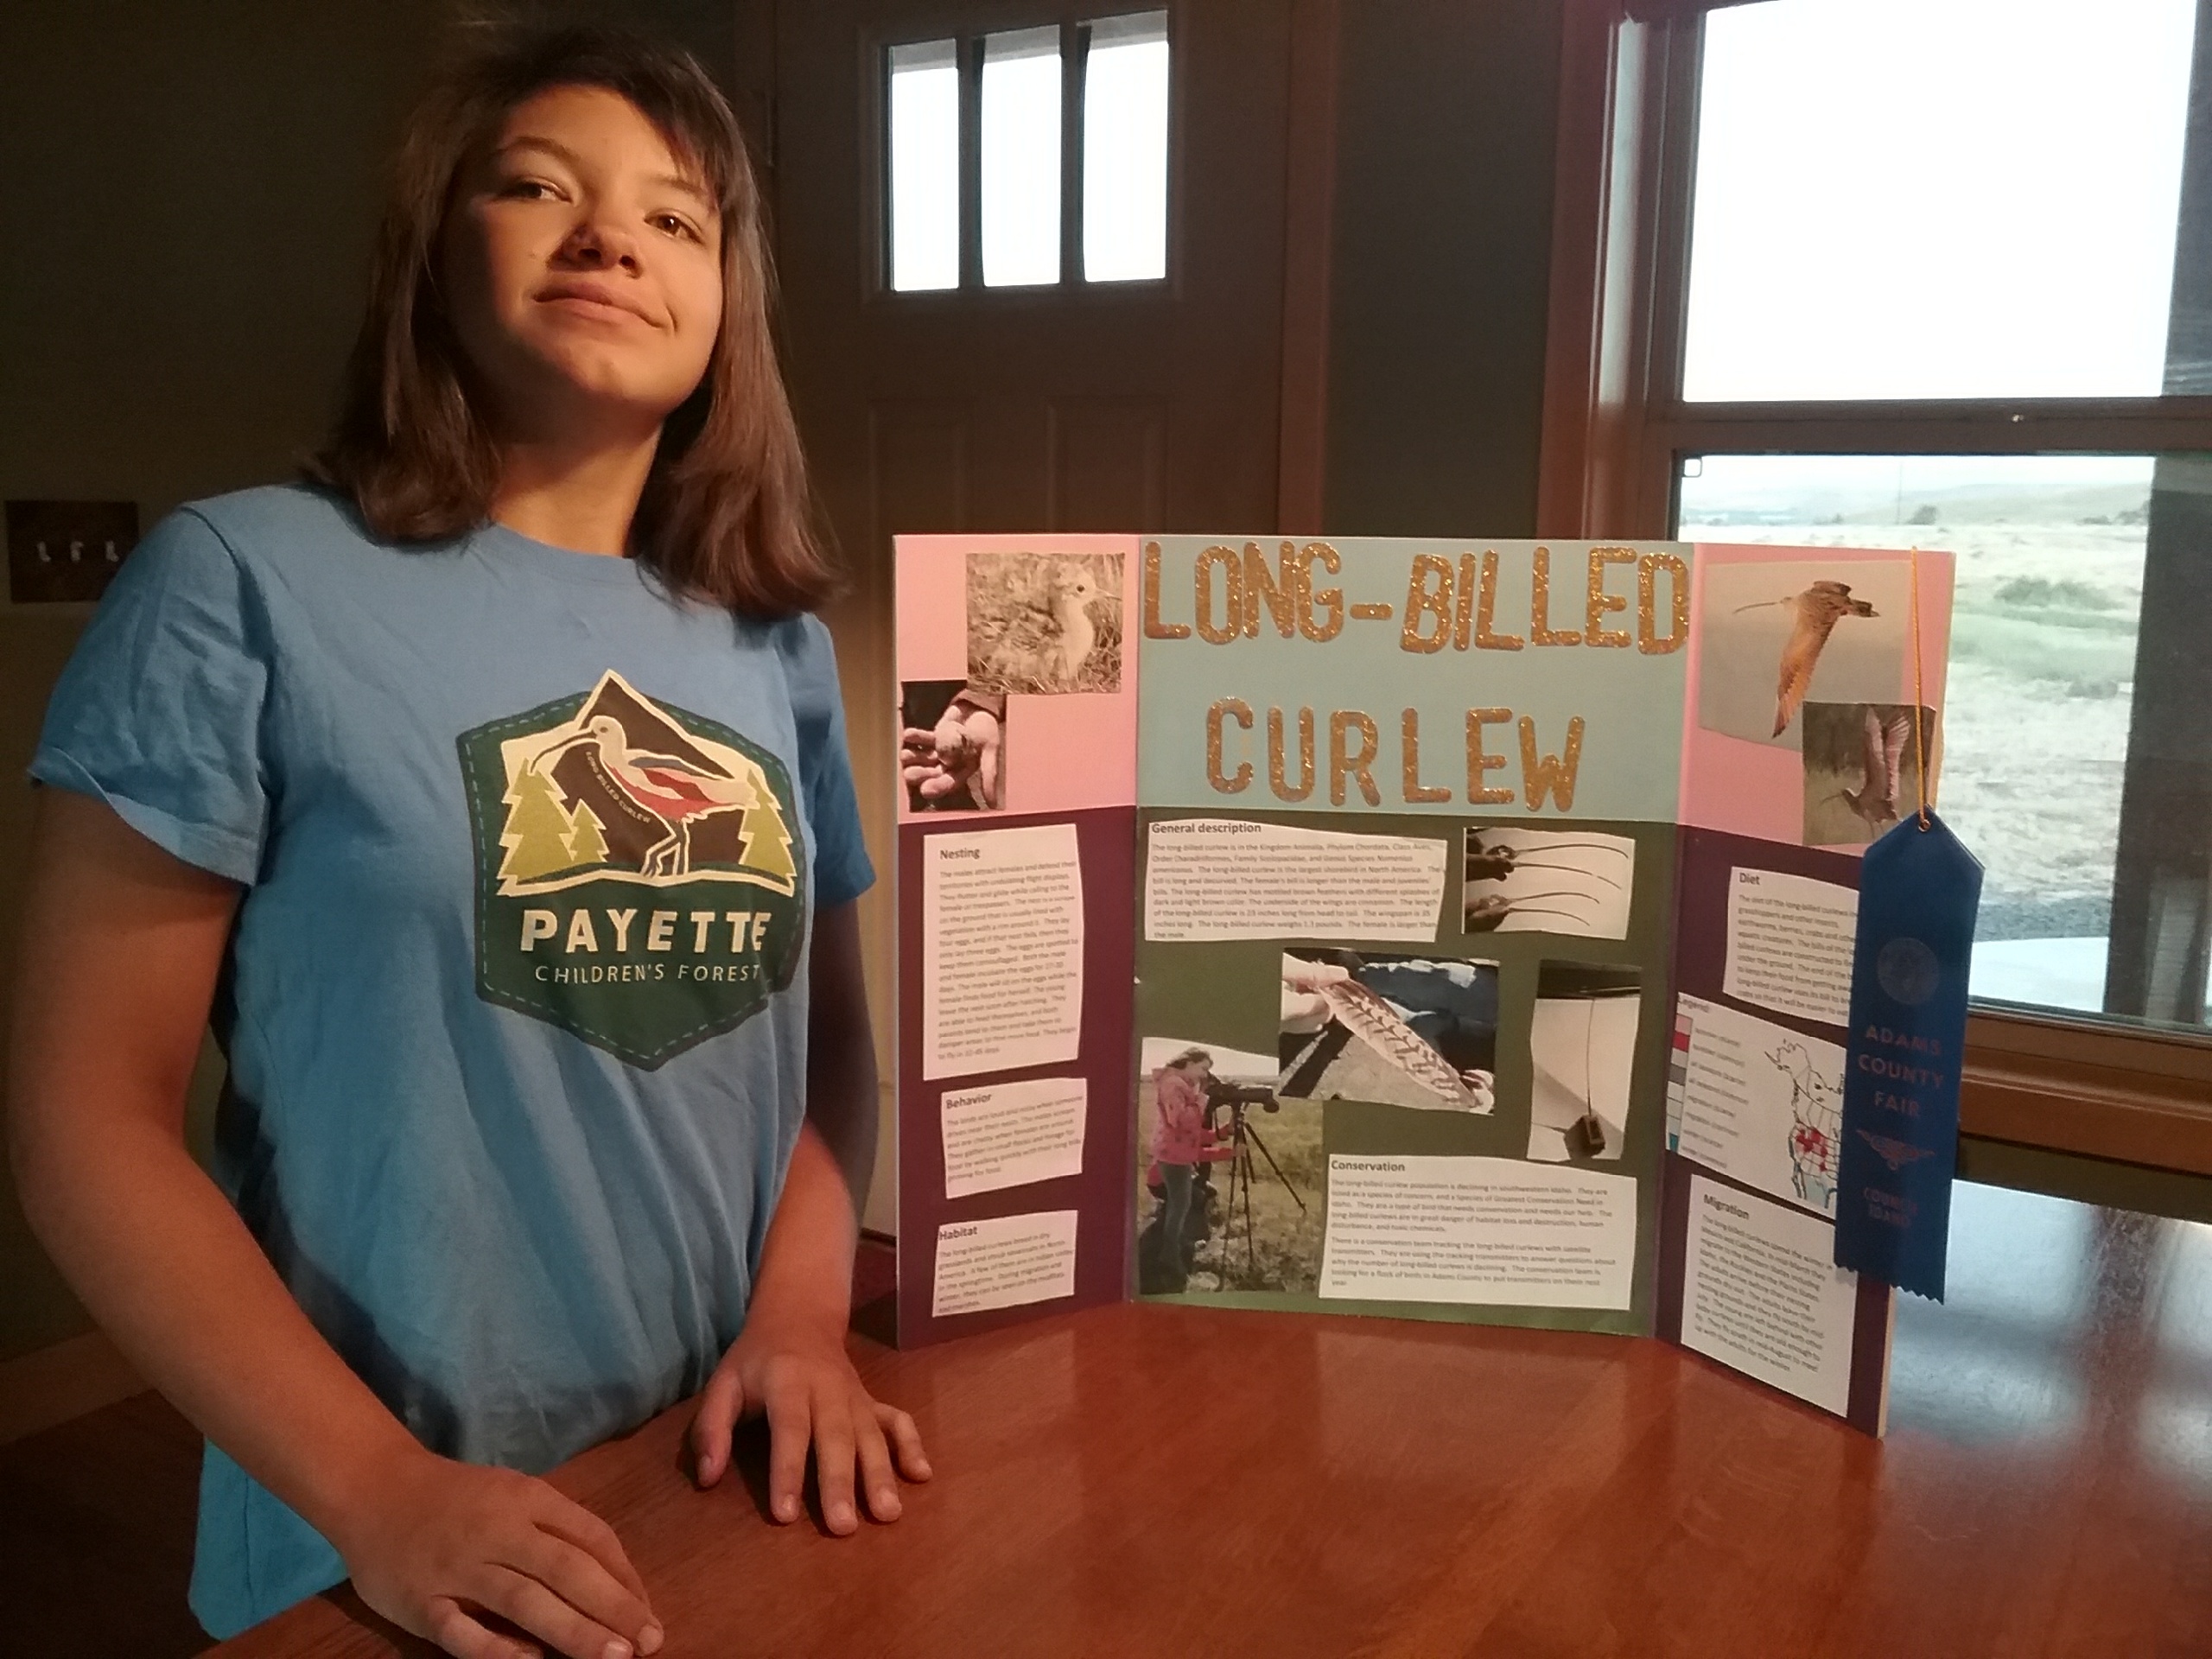 Ruth proudly stands next to her poster with long-billed curlew photos and information